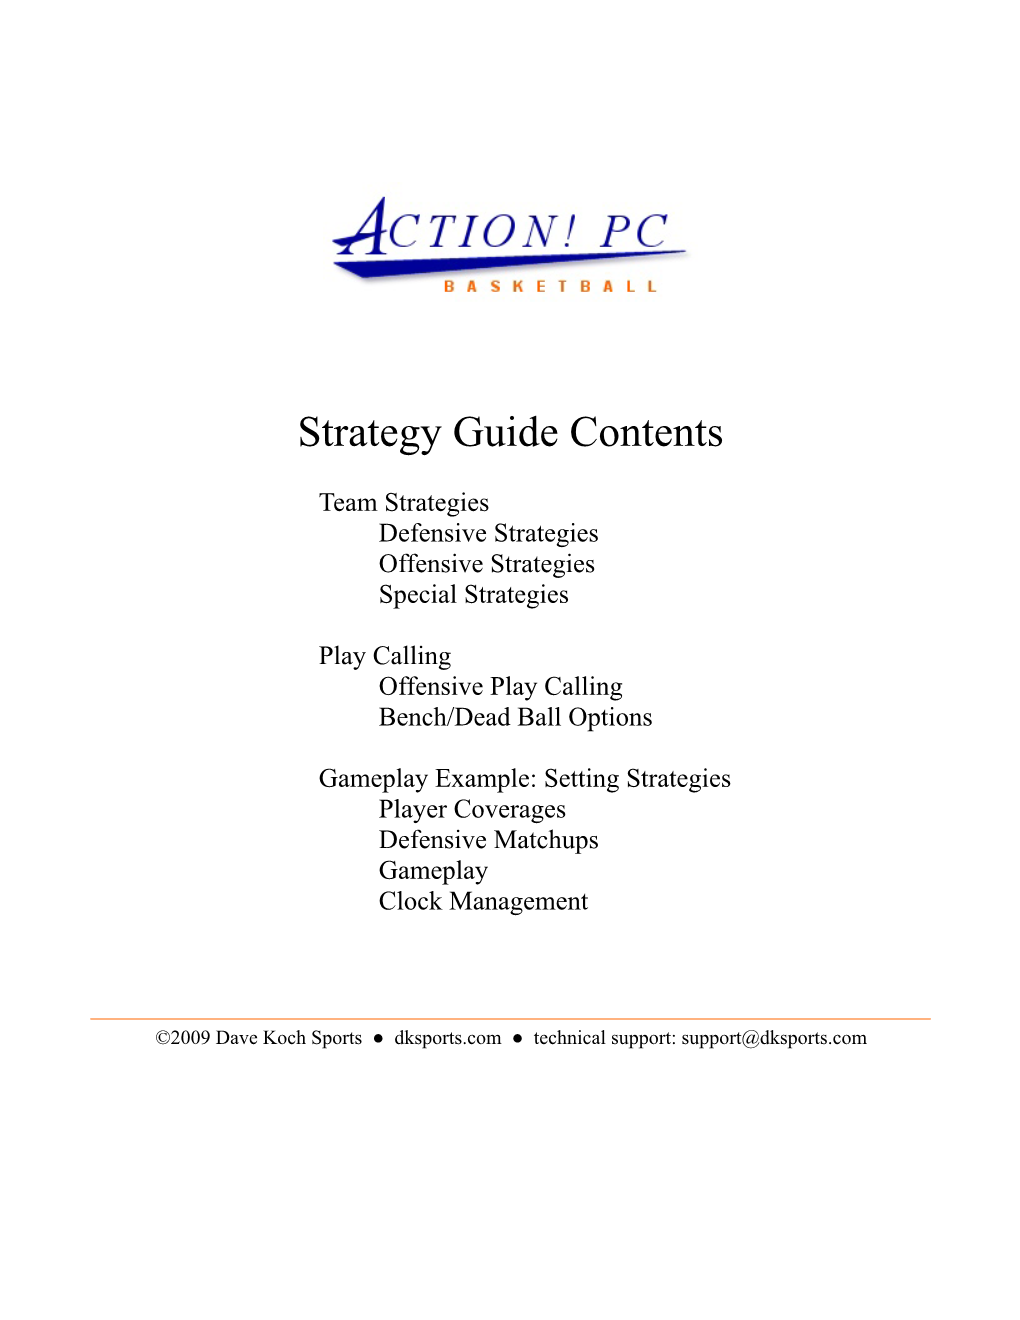 Free Action! PC Basketball Strategy Guide PDF